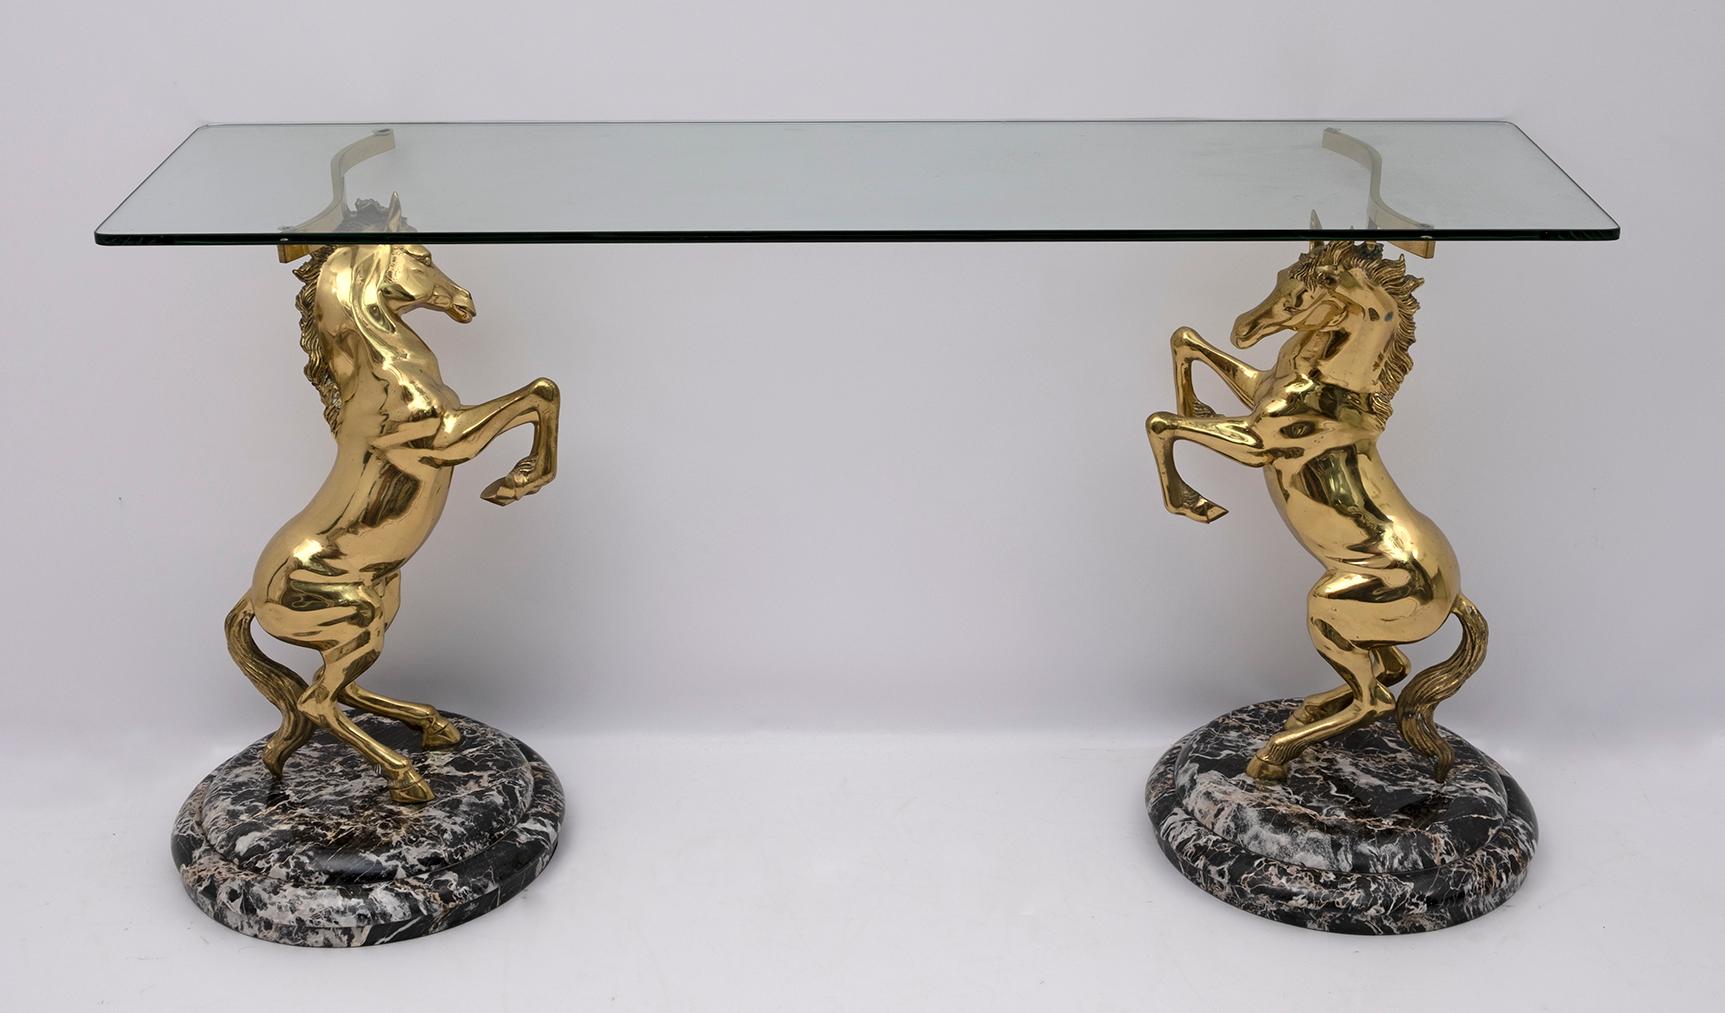 Beautiful console table depicting sculptures of a pair of rampant horses in solid brass, the bases are in black marble and the top in thick glass. Italian production of the 70s.
It is possible to replace the glass top, obtaining a smaller or larger